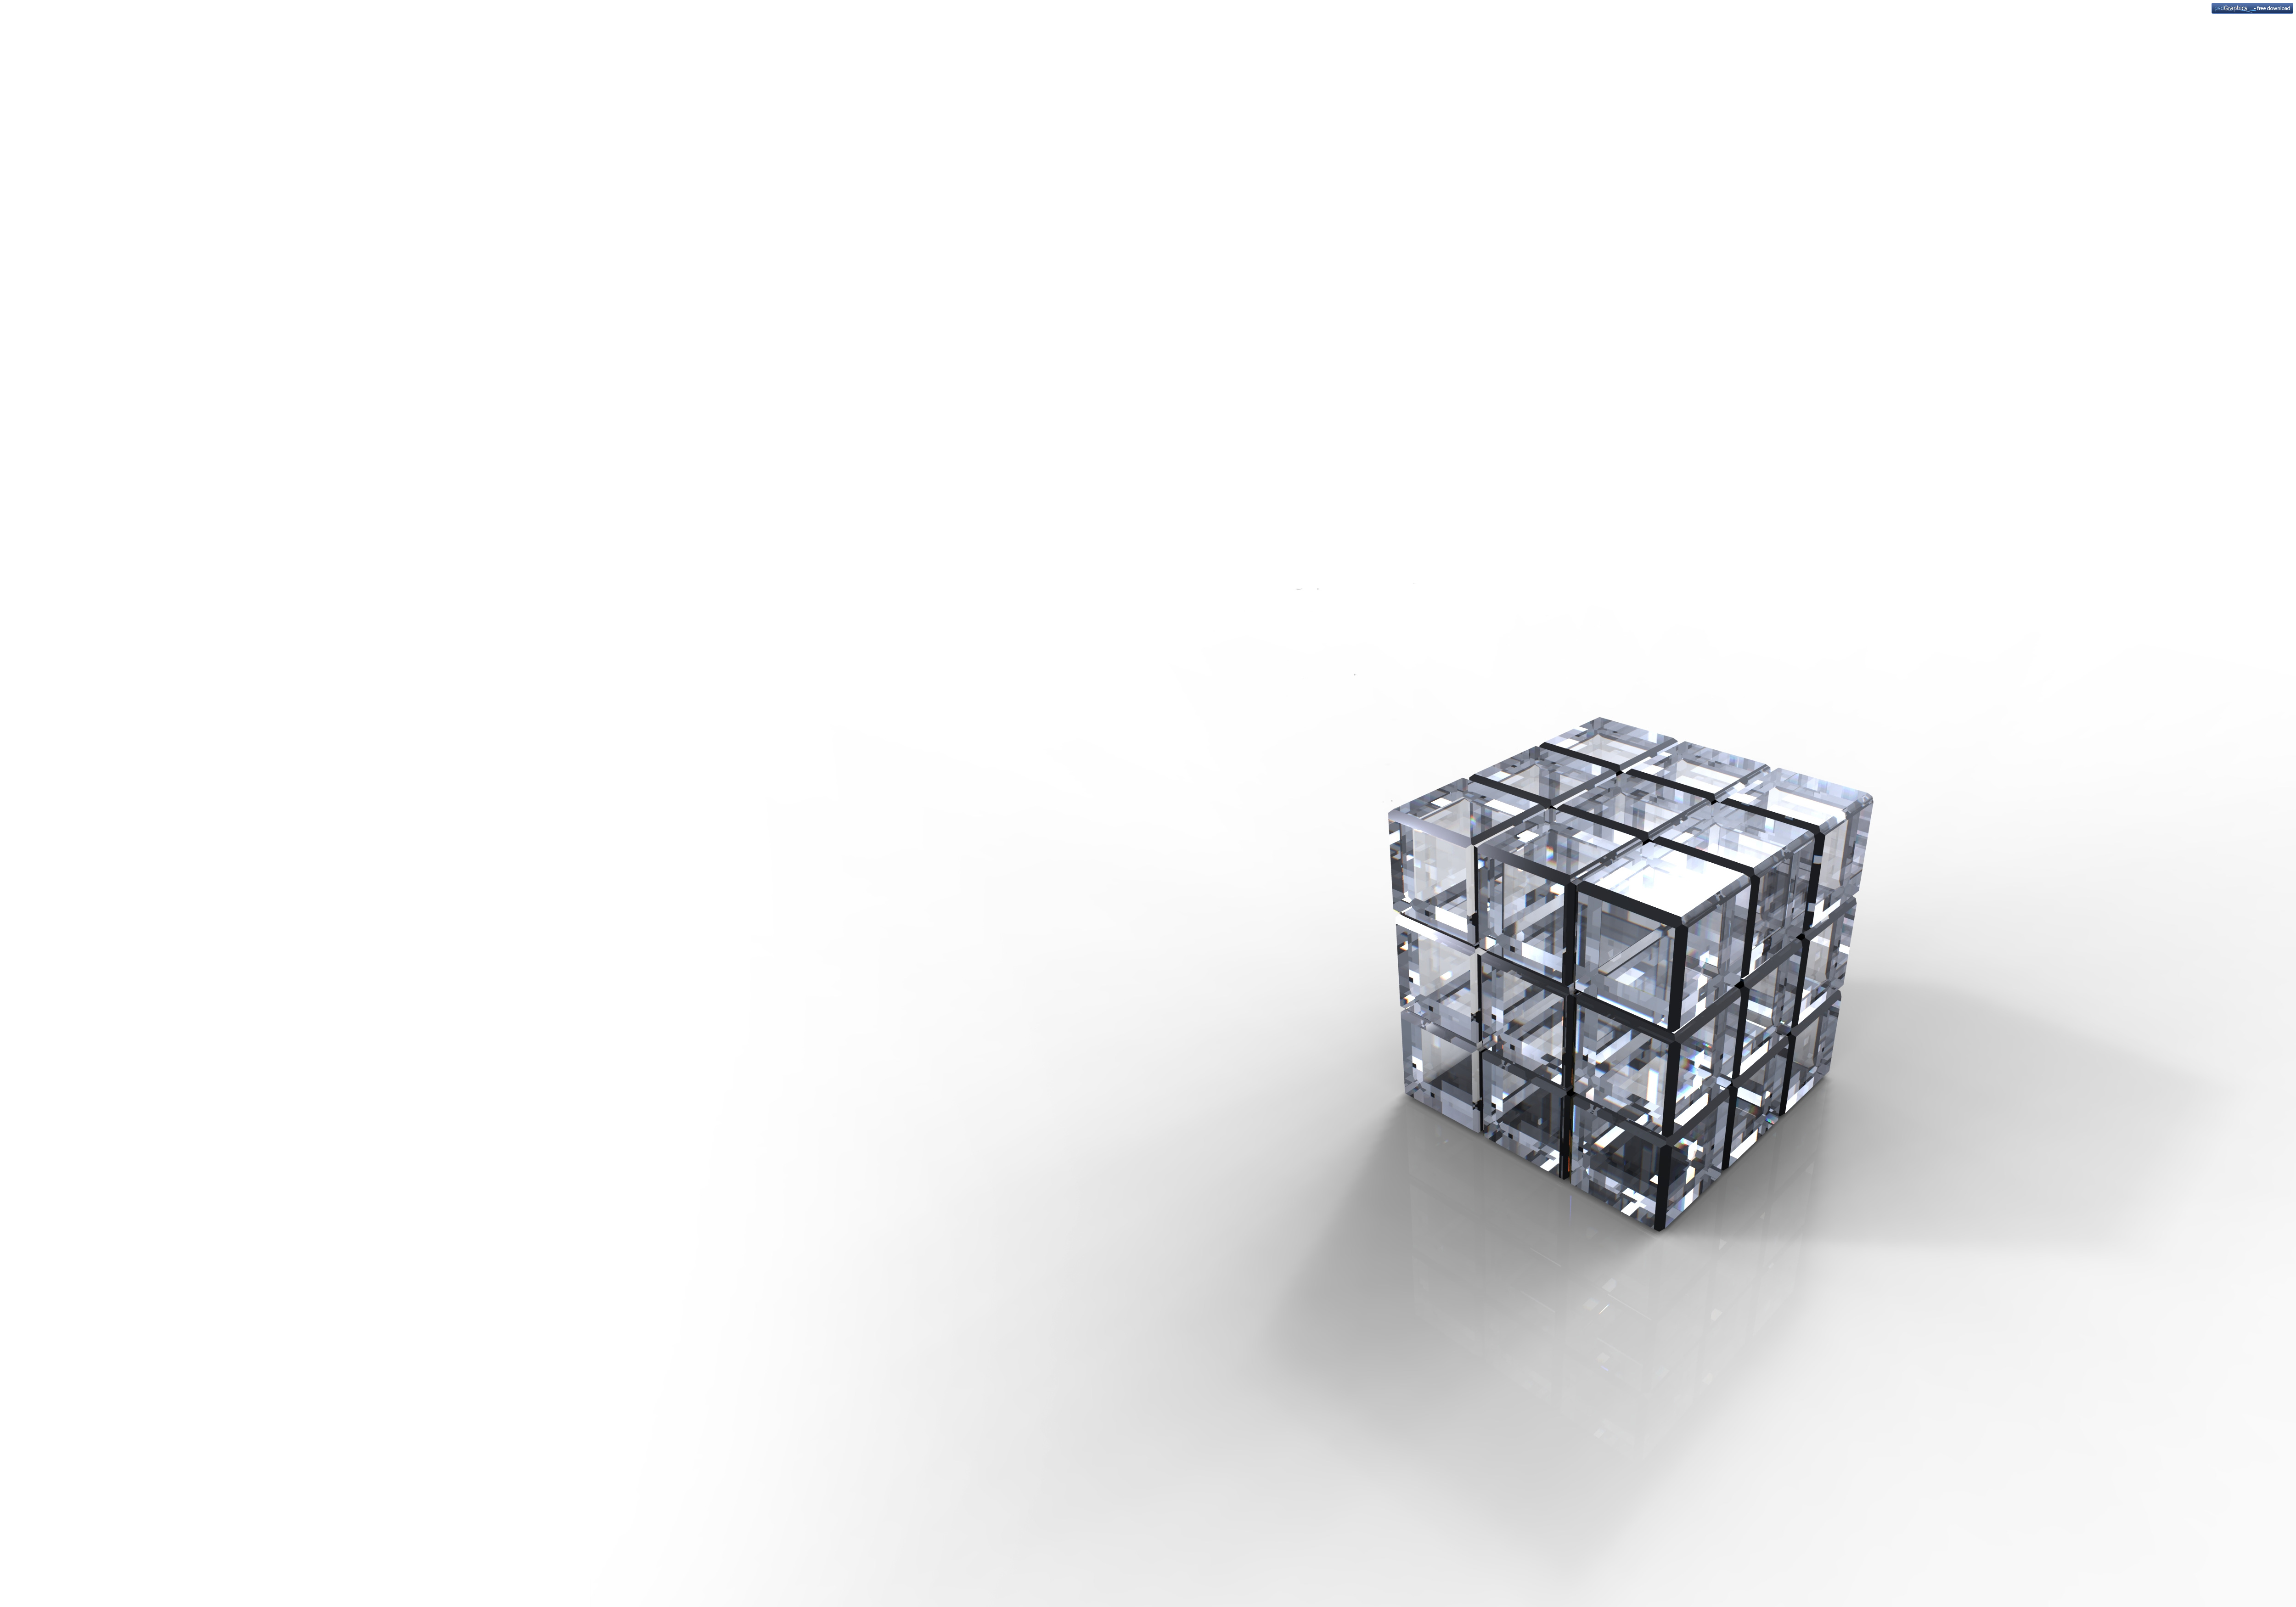 Crystal Cube Background Psdgraphics